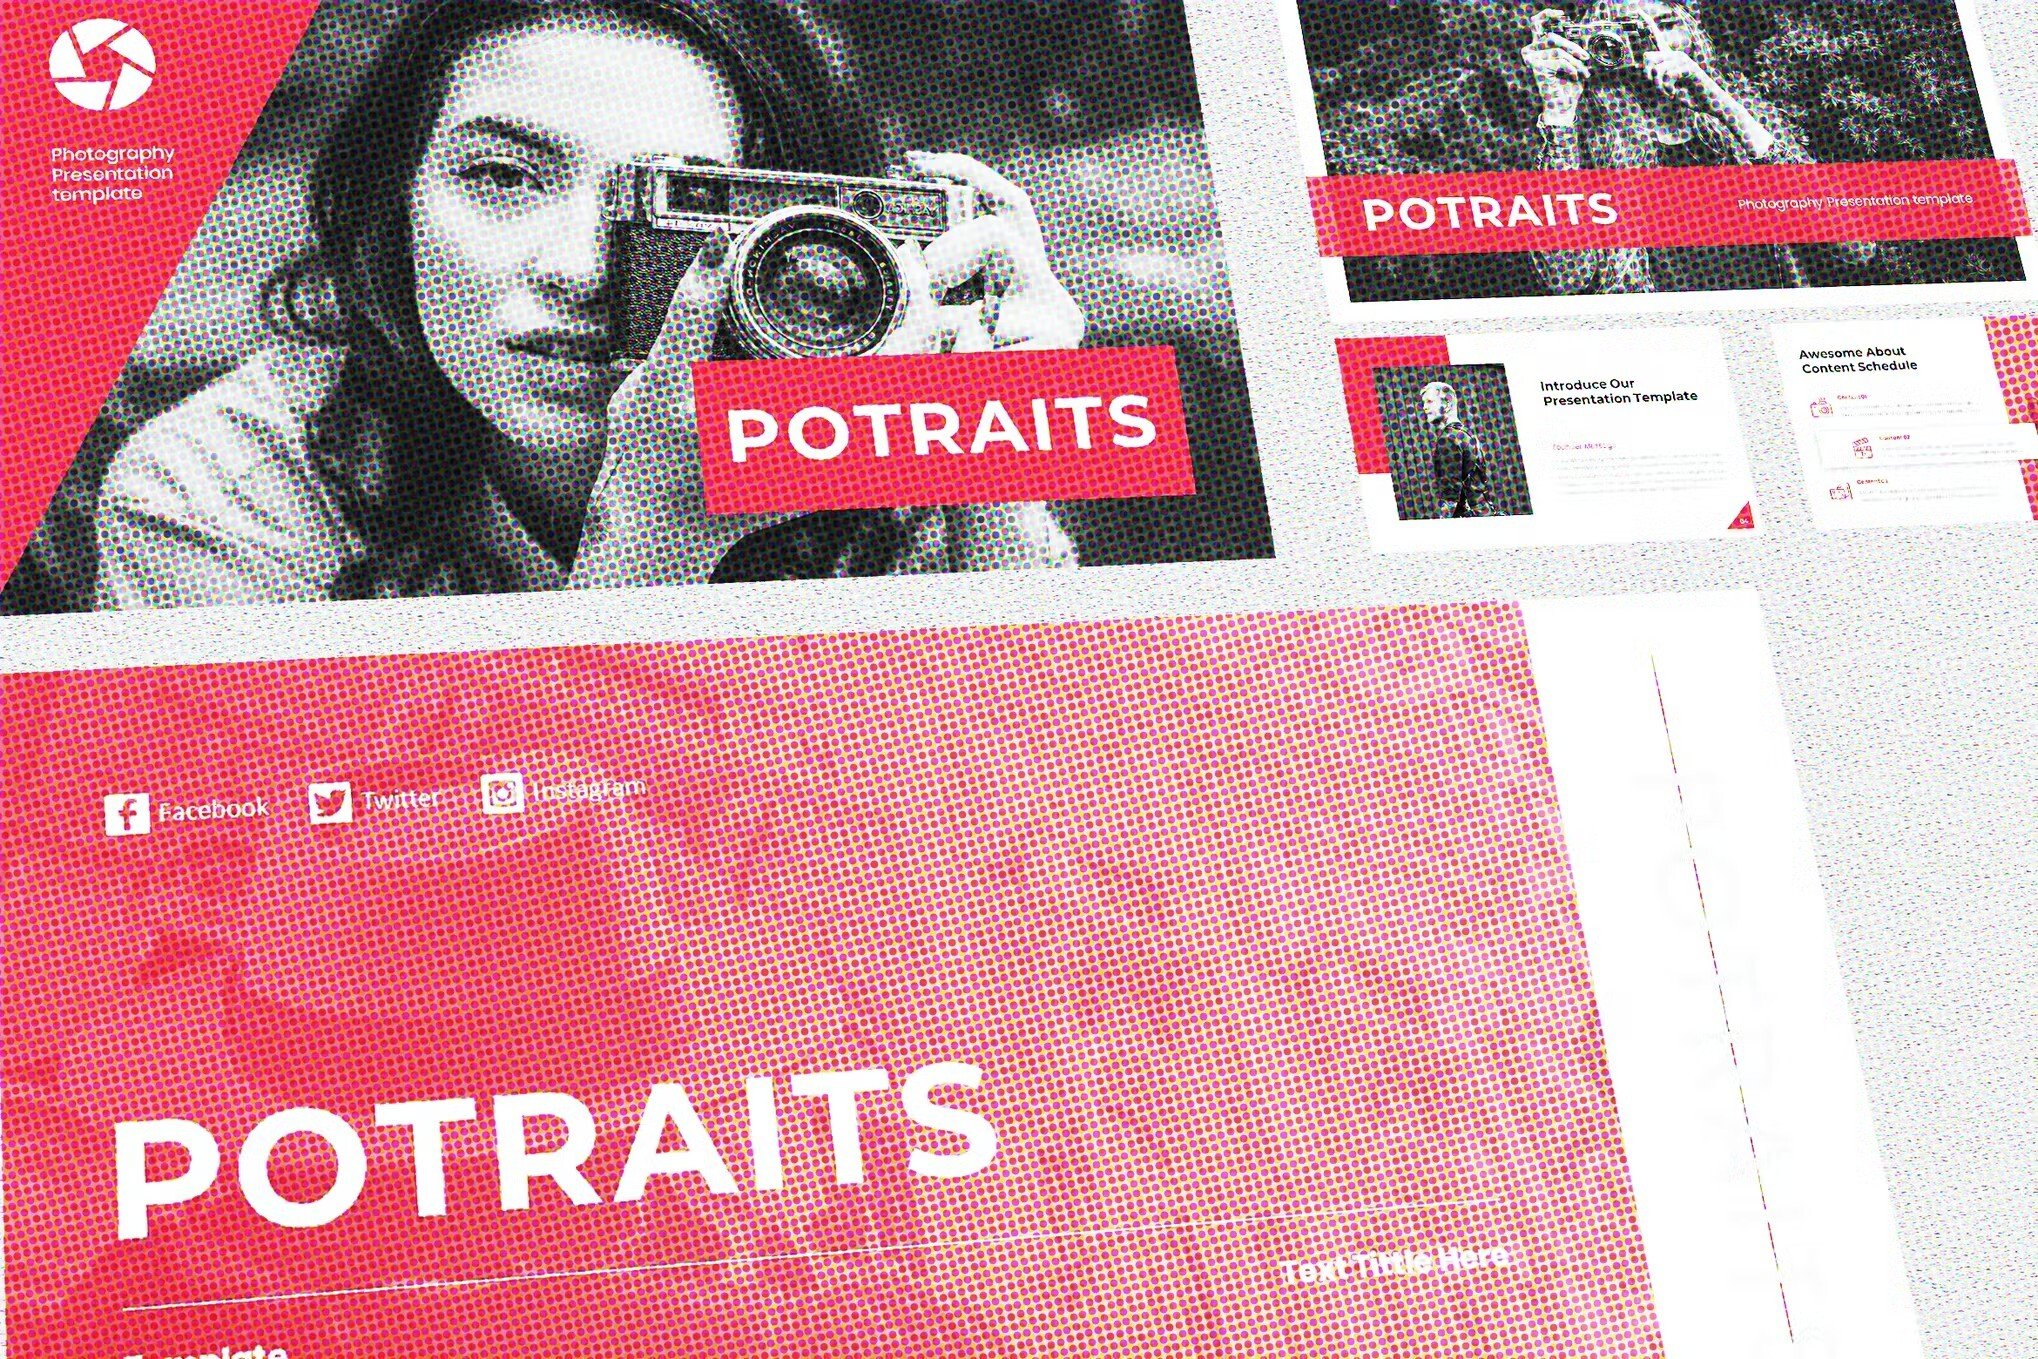 photography powerpoint template